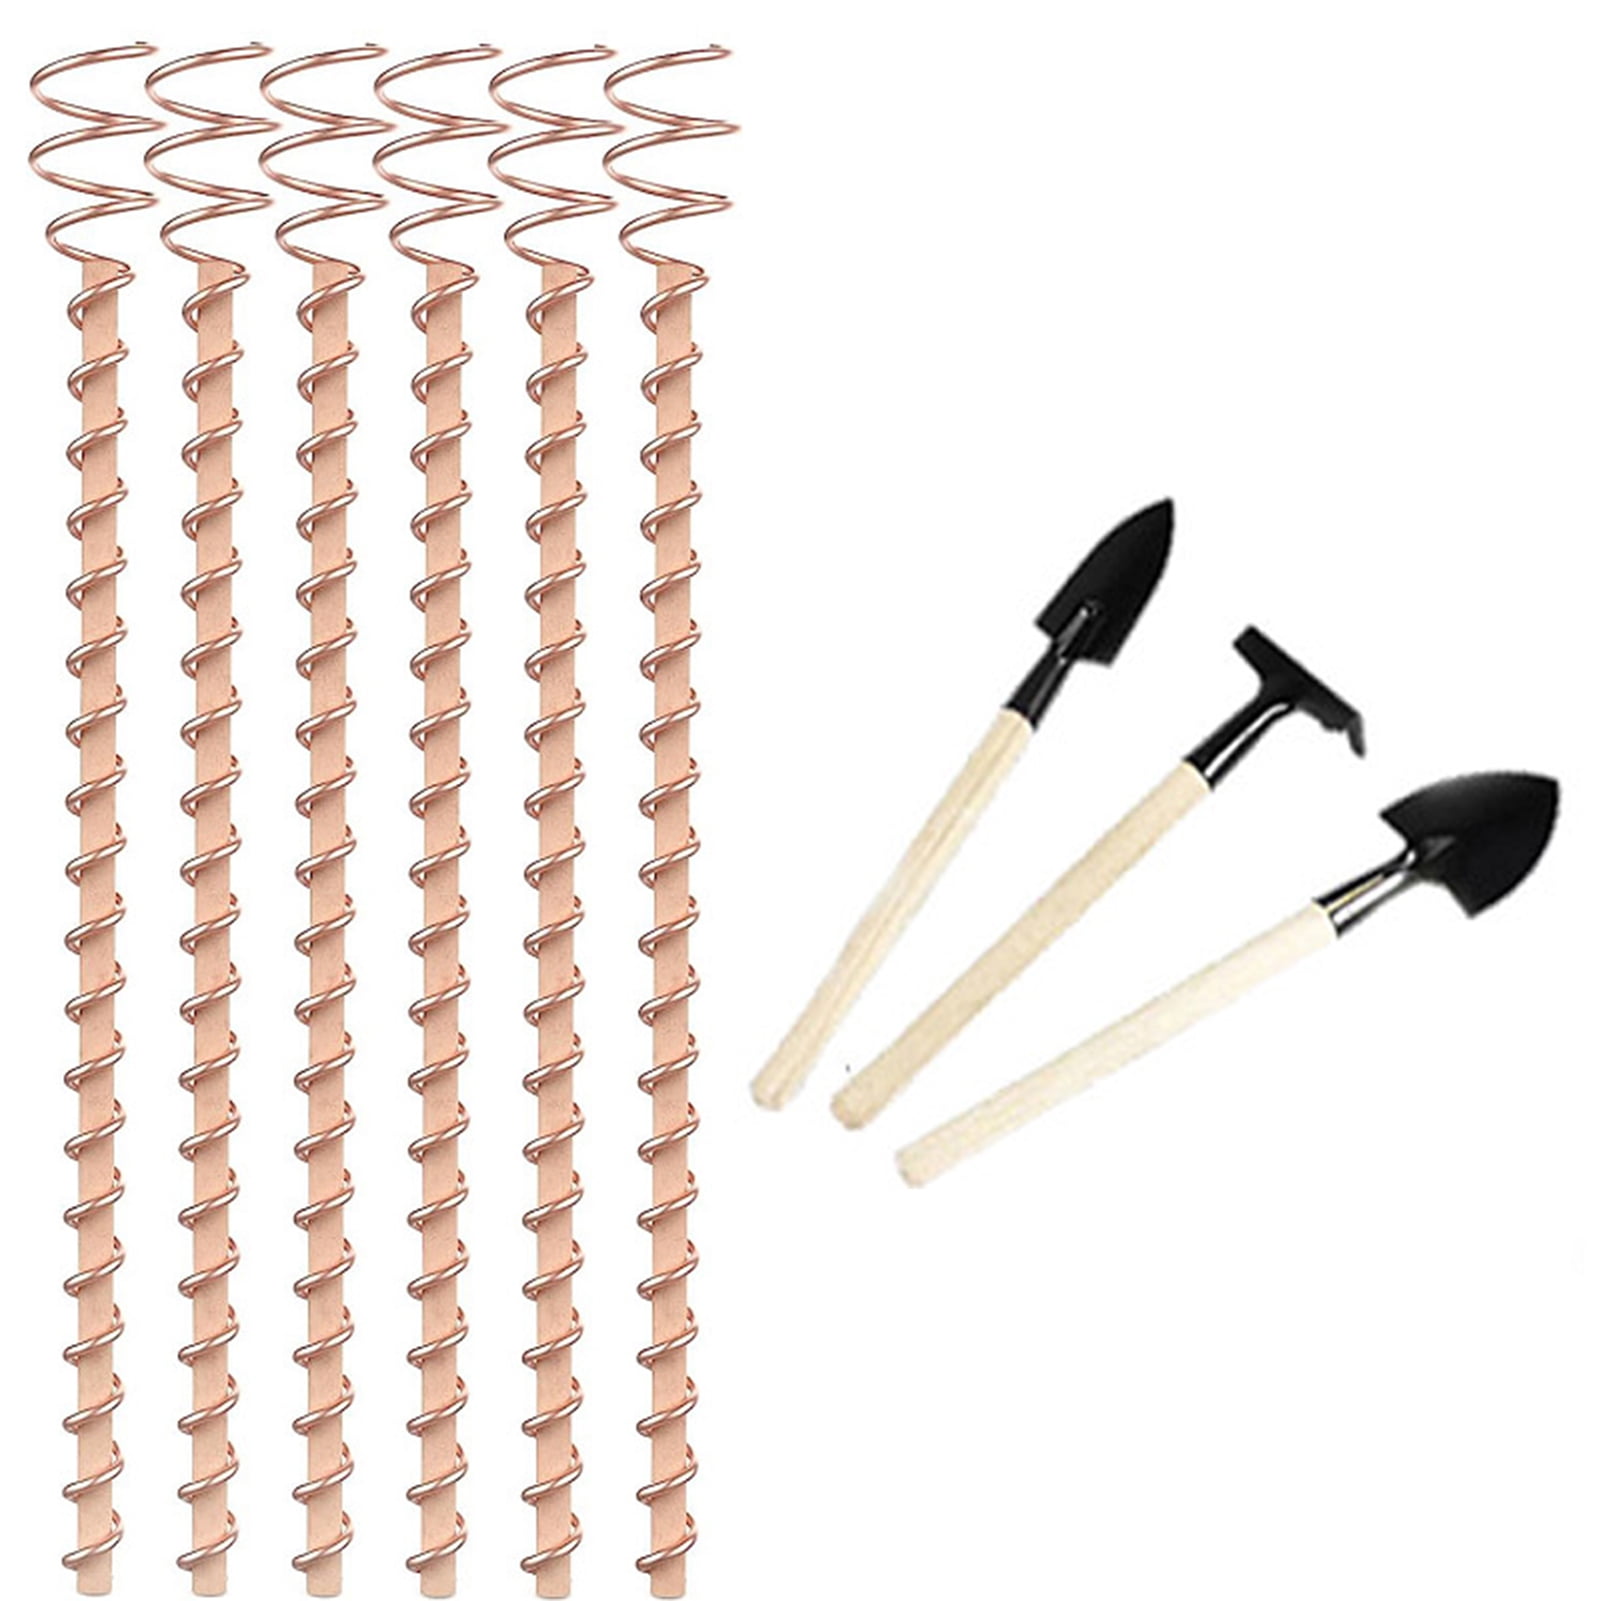 Pnellth 7Pcs/Set Electroculture Plant Stake with 6 Wooden Rod Garden Plants  Vegetables Growing Electro Culture Copper Wire Coil Gardening Supplies